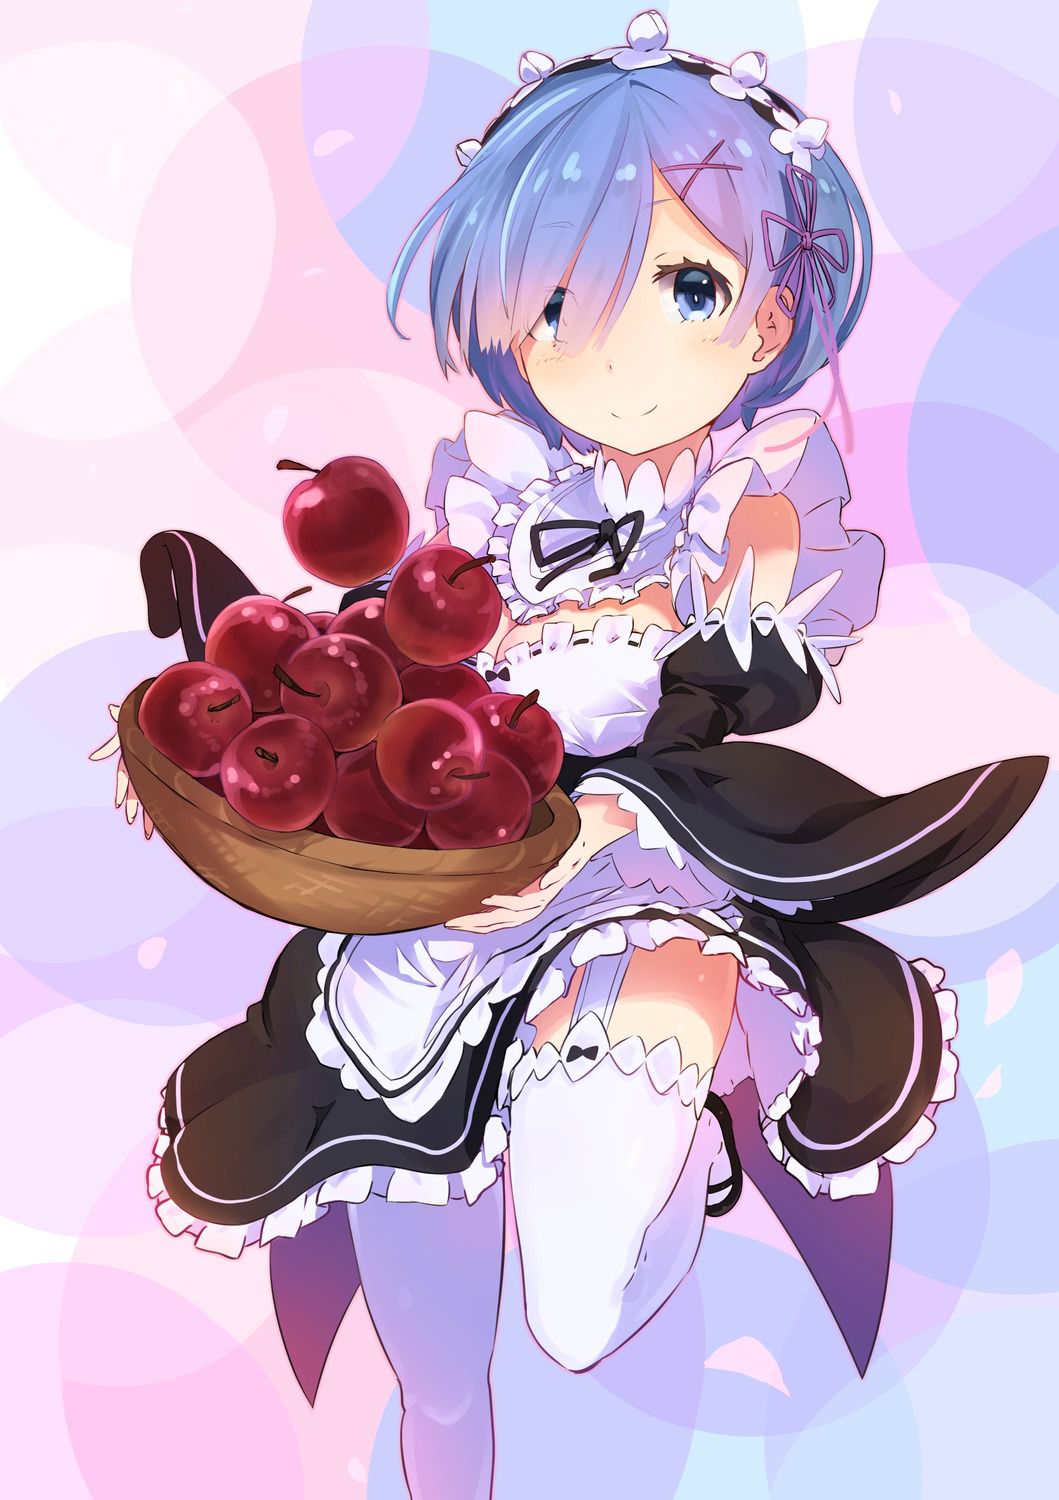 [Rezero] REM Rin lamb Rin, cute Twin Sisters five! R M T! [Pictures and wallpapers] (Different world life 20 Re: zero start) 2